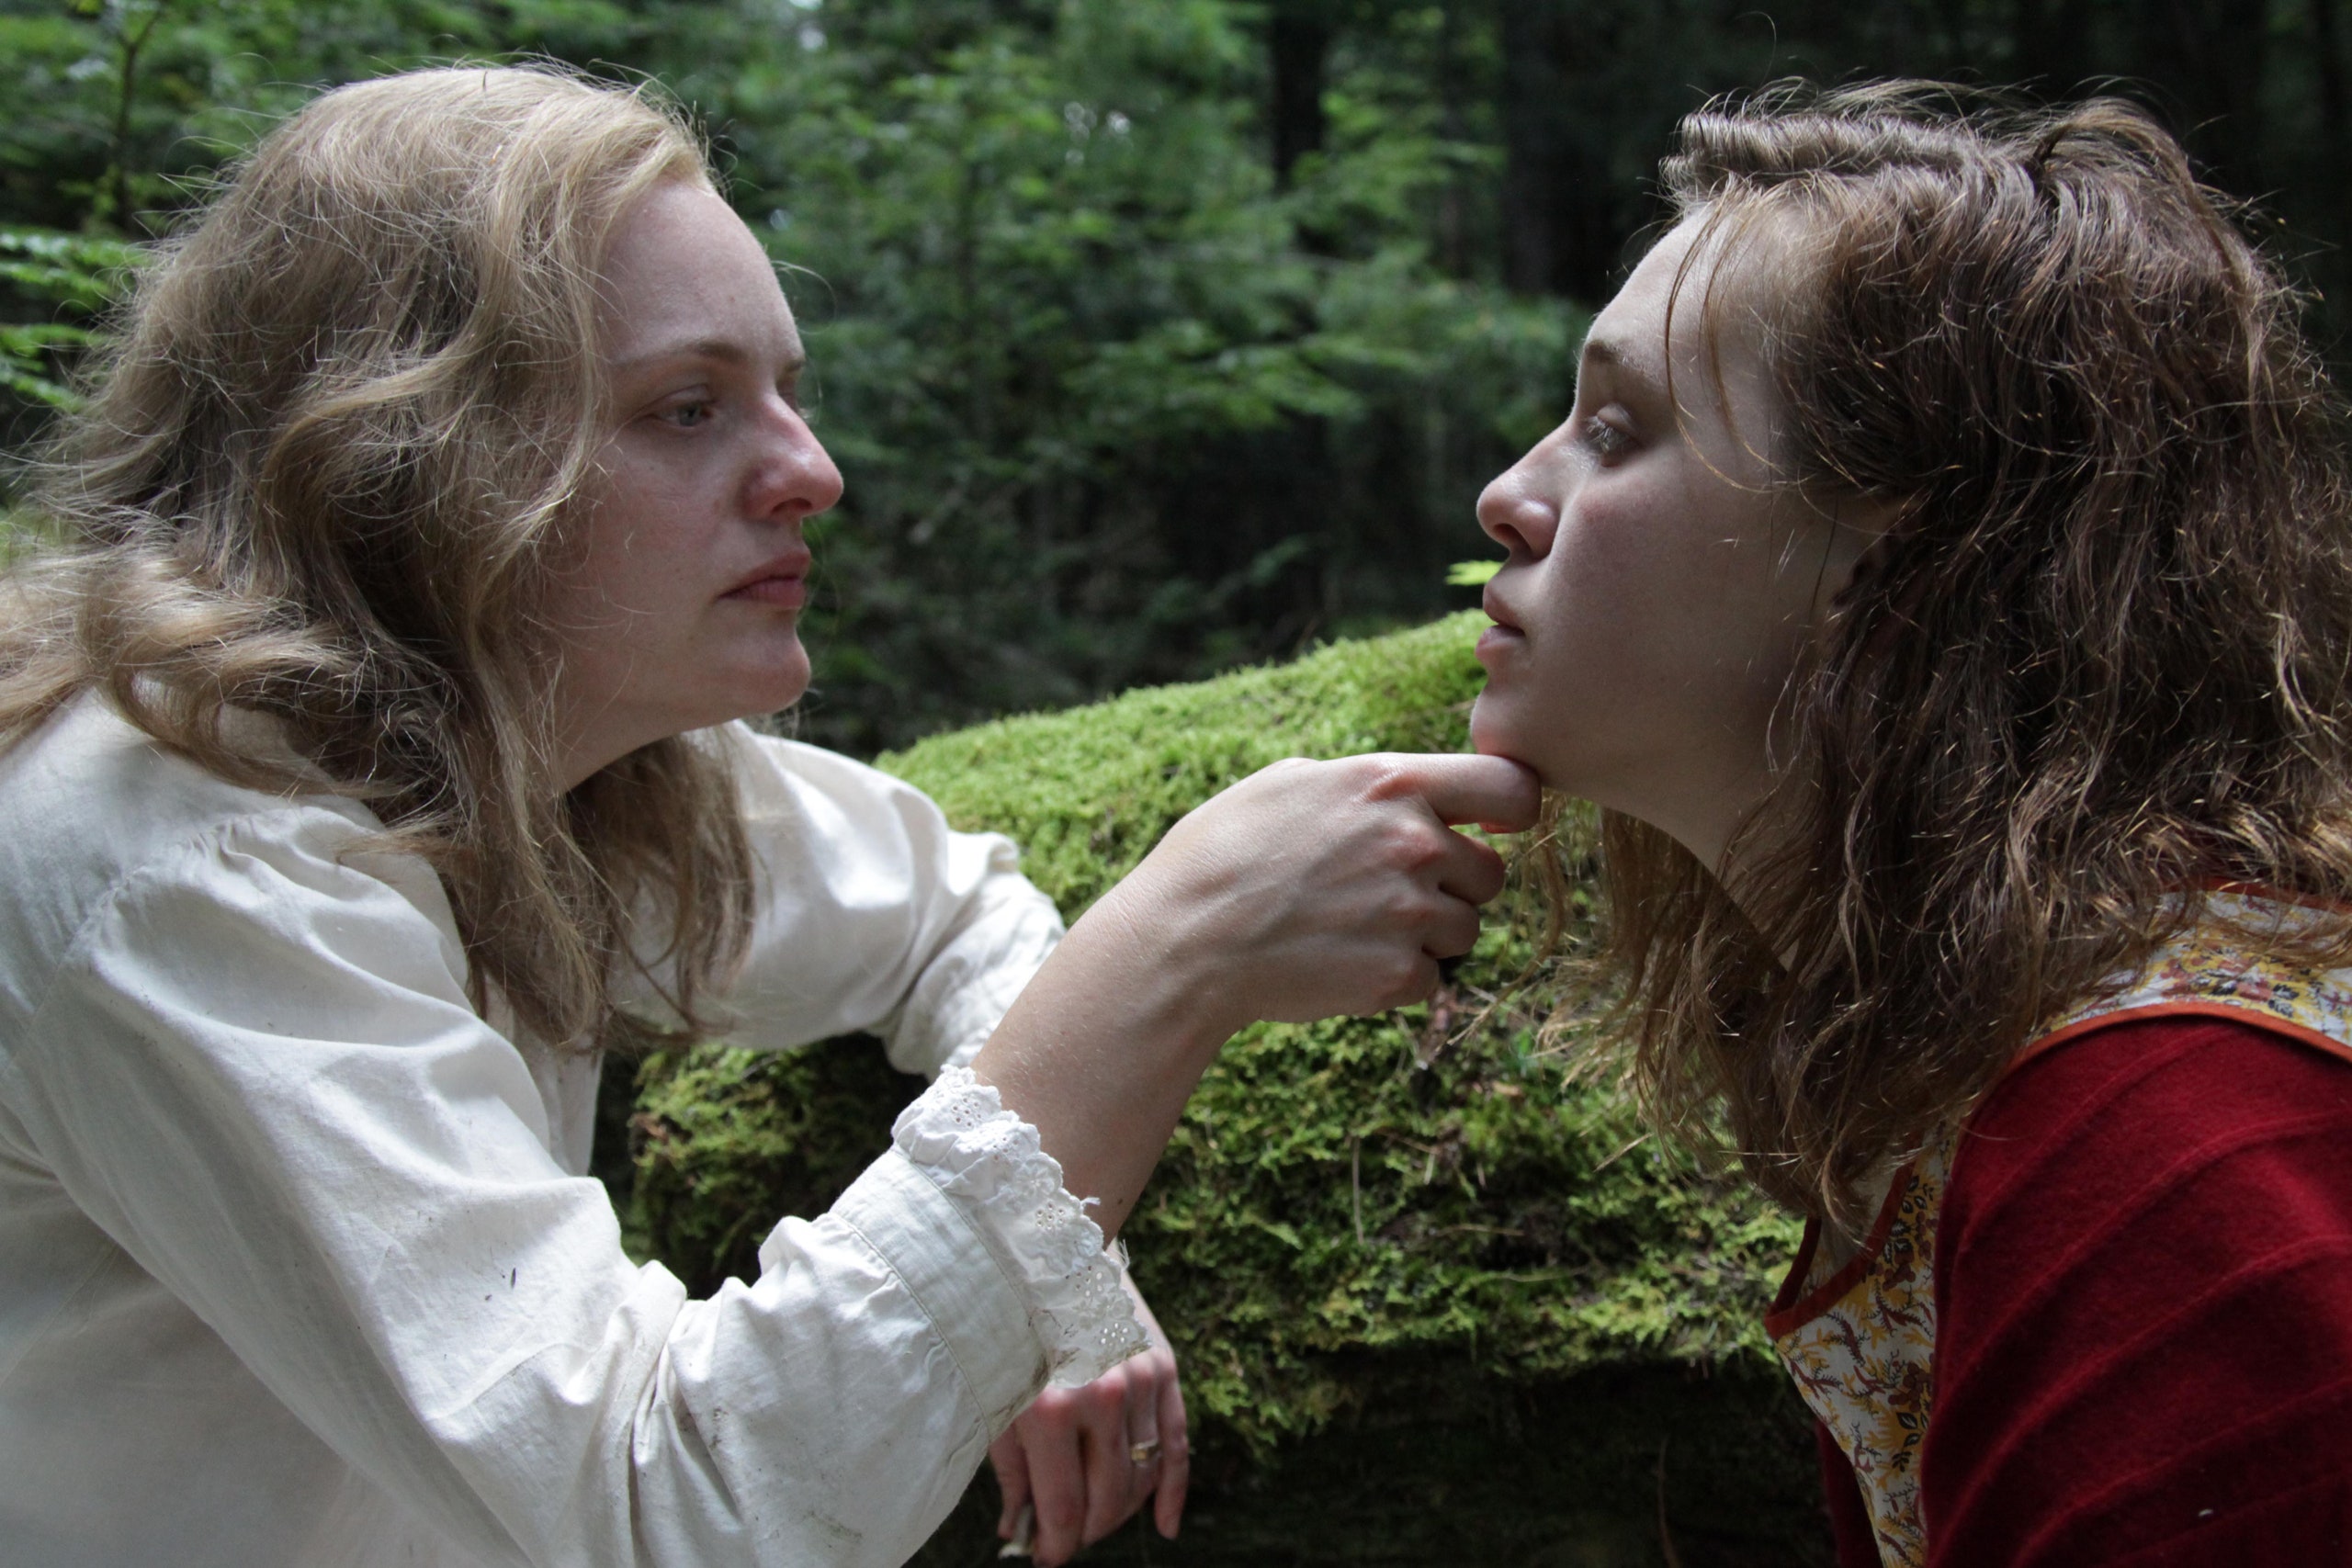 two women in the woods, one woman is holding the second woman's chin